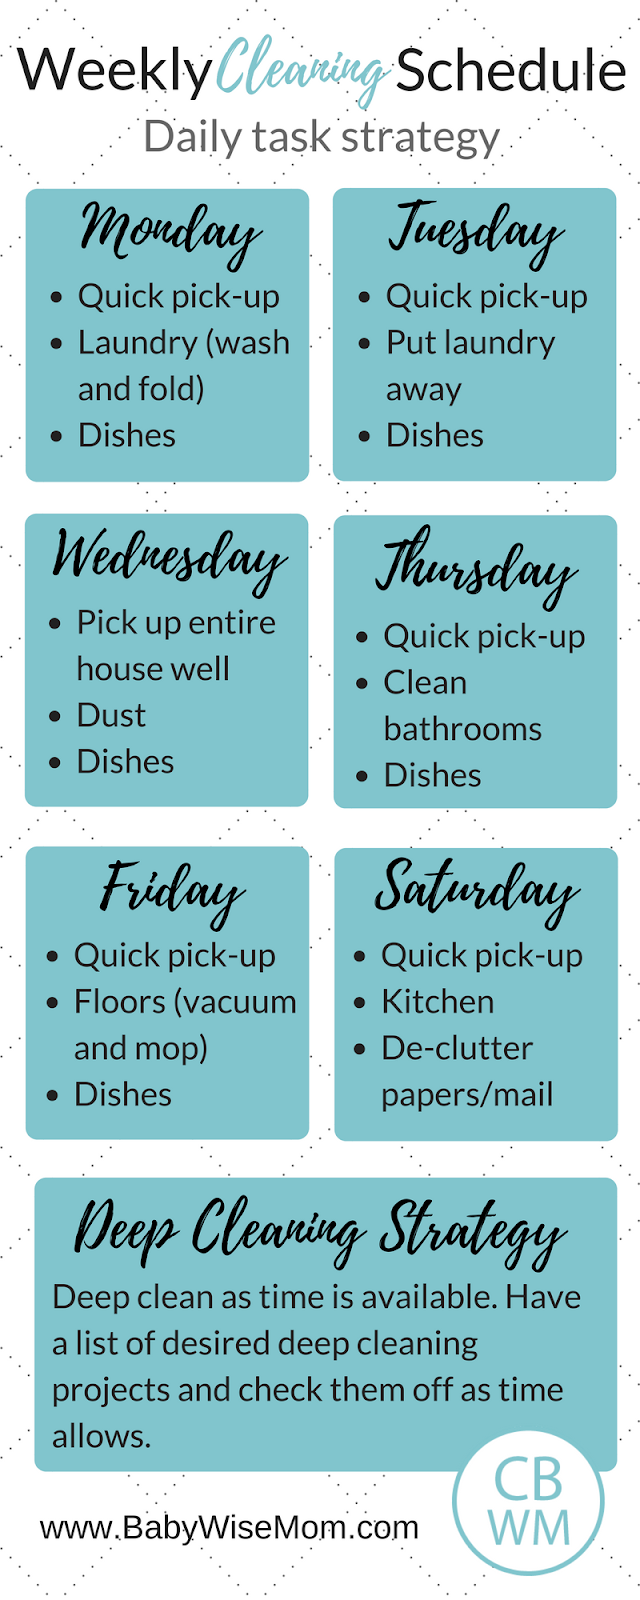 5 Quick Cleaning Tips For Parents 